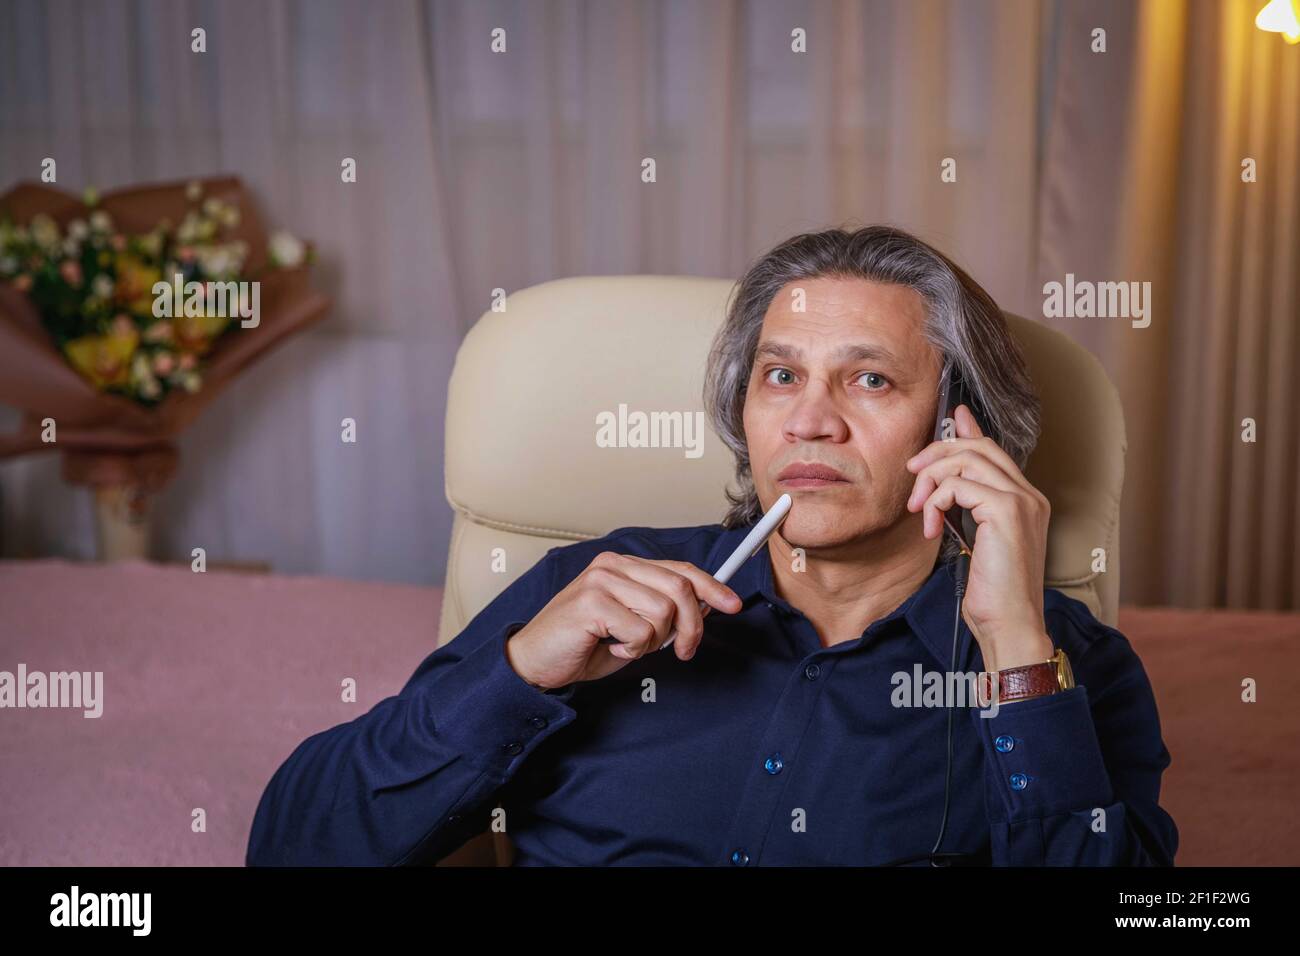 A 50-year-old man with long hair speaks on the phone at home, sitting in a chair. Relaxing delight. Stock Photo